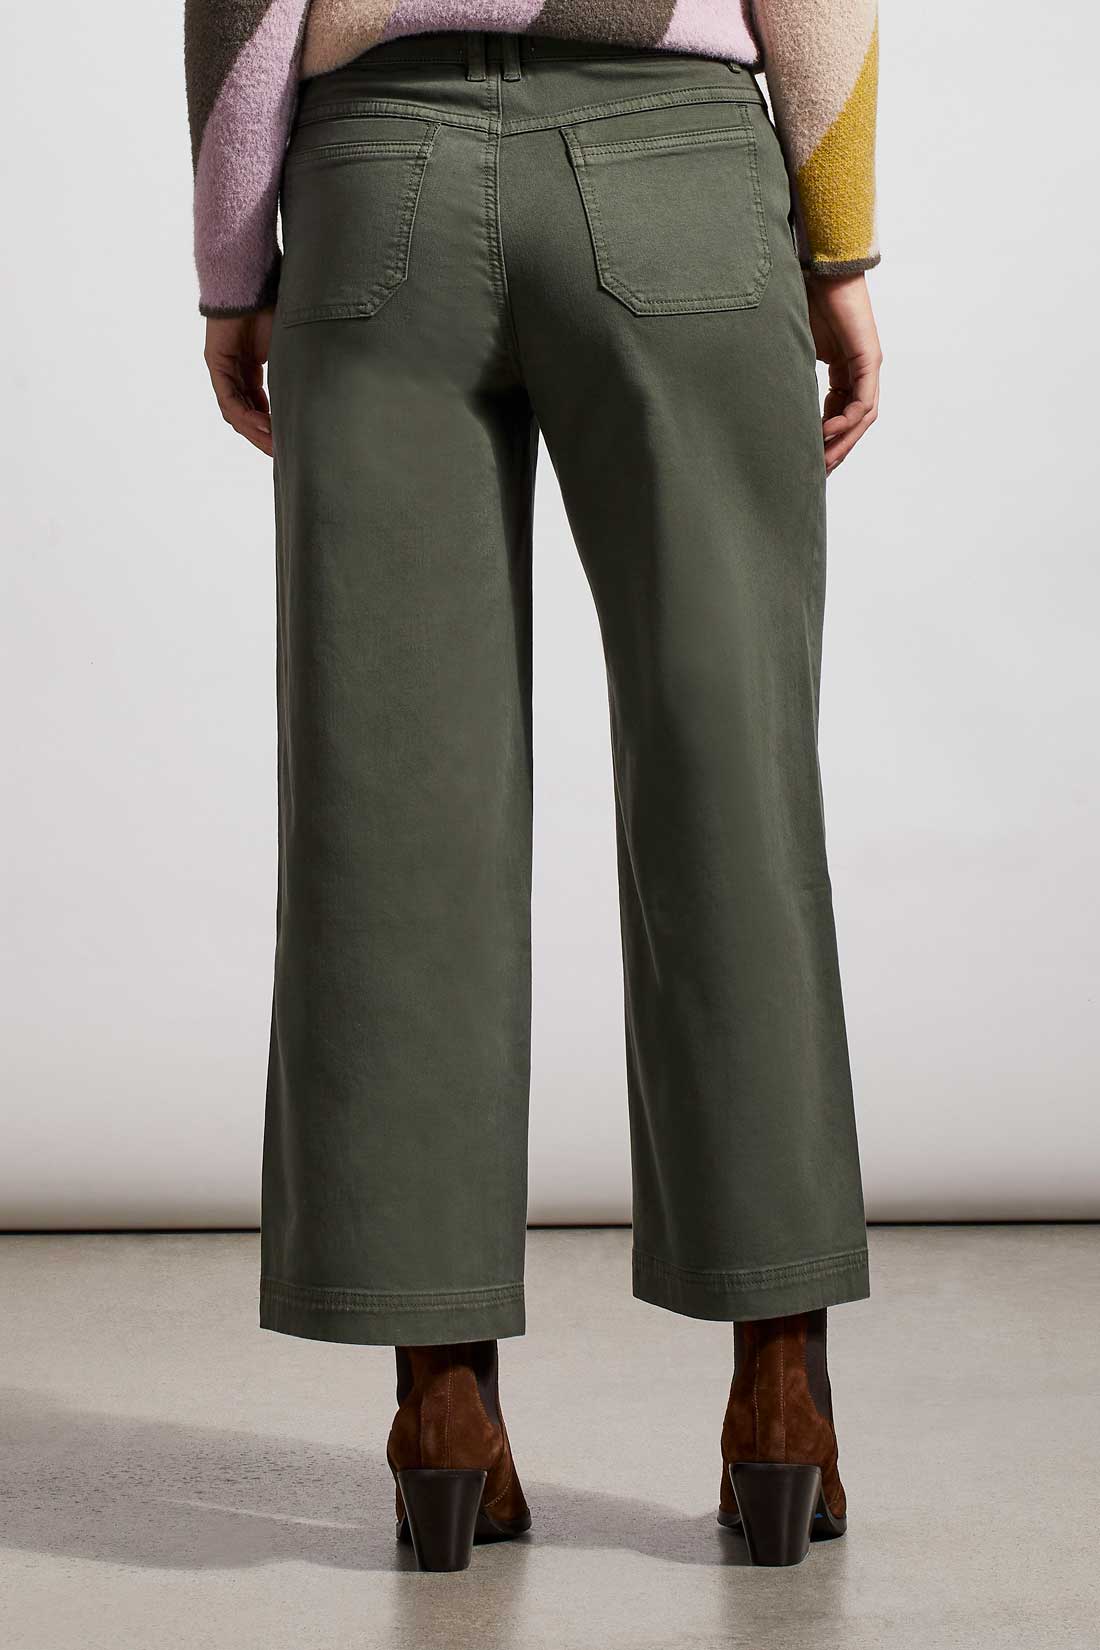 Audrey Button Fly Cropped Wide Leg Pant